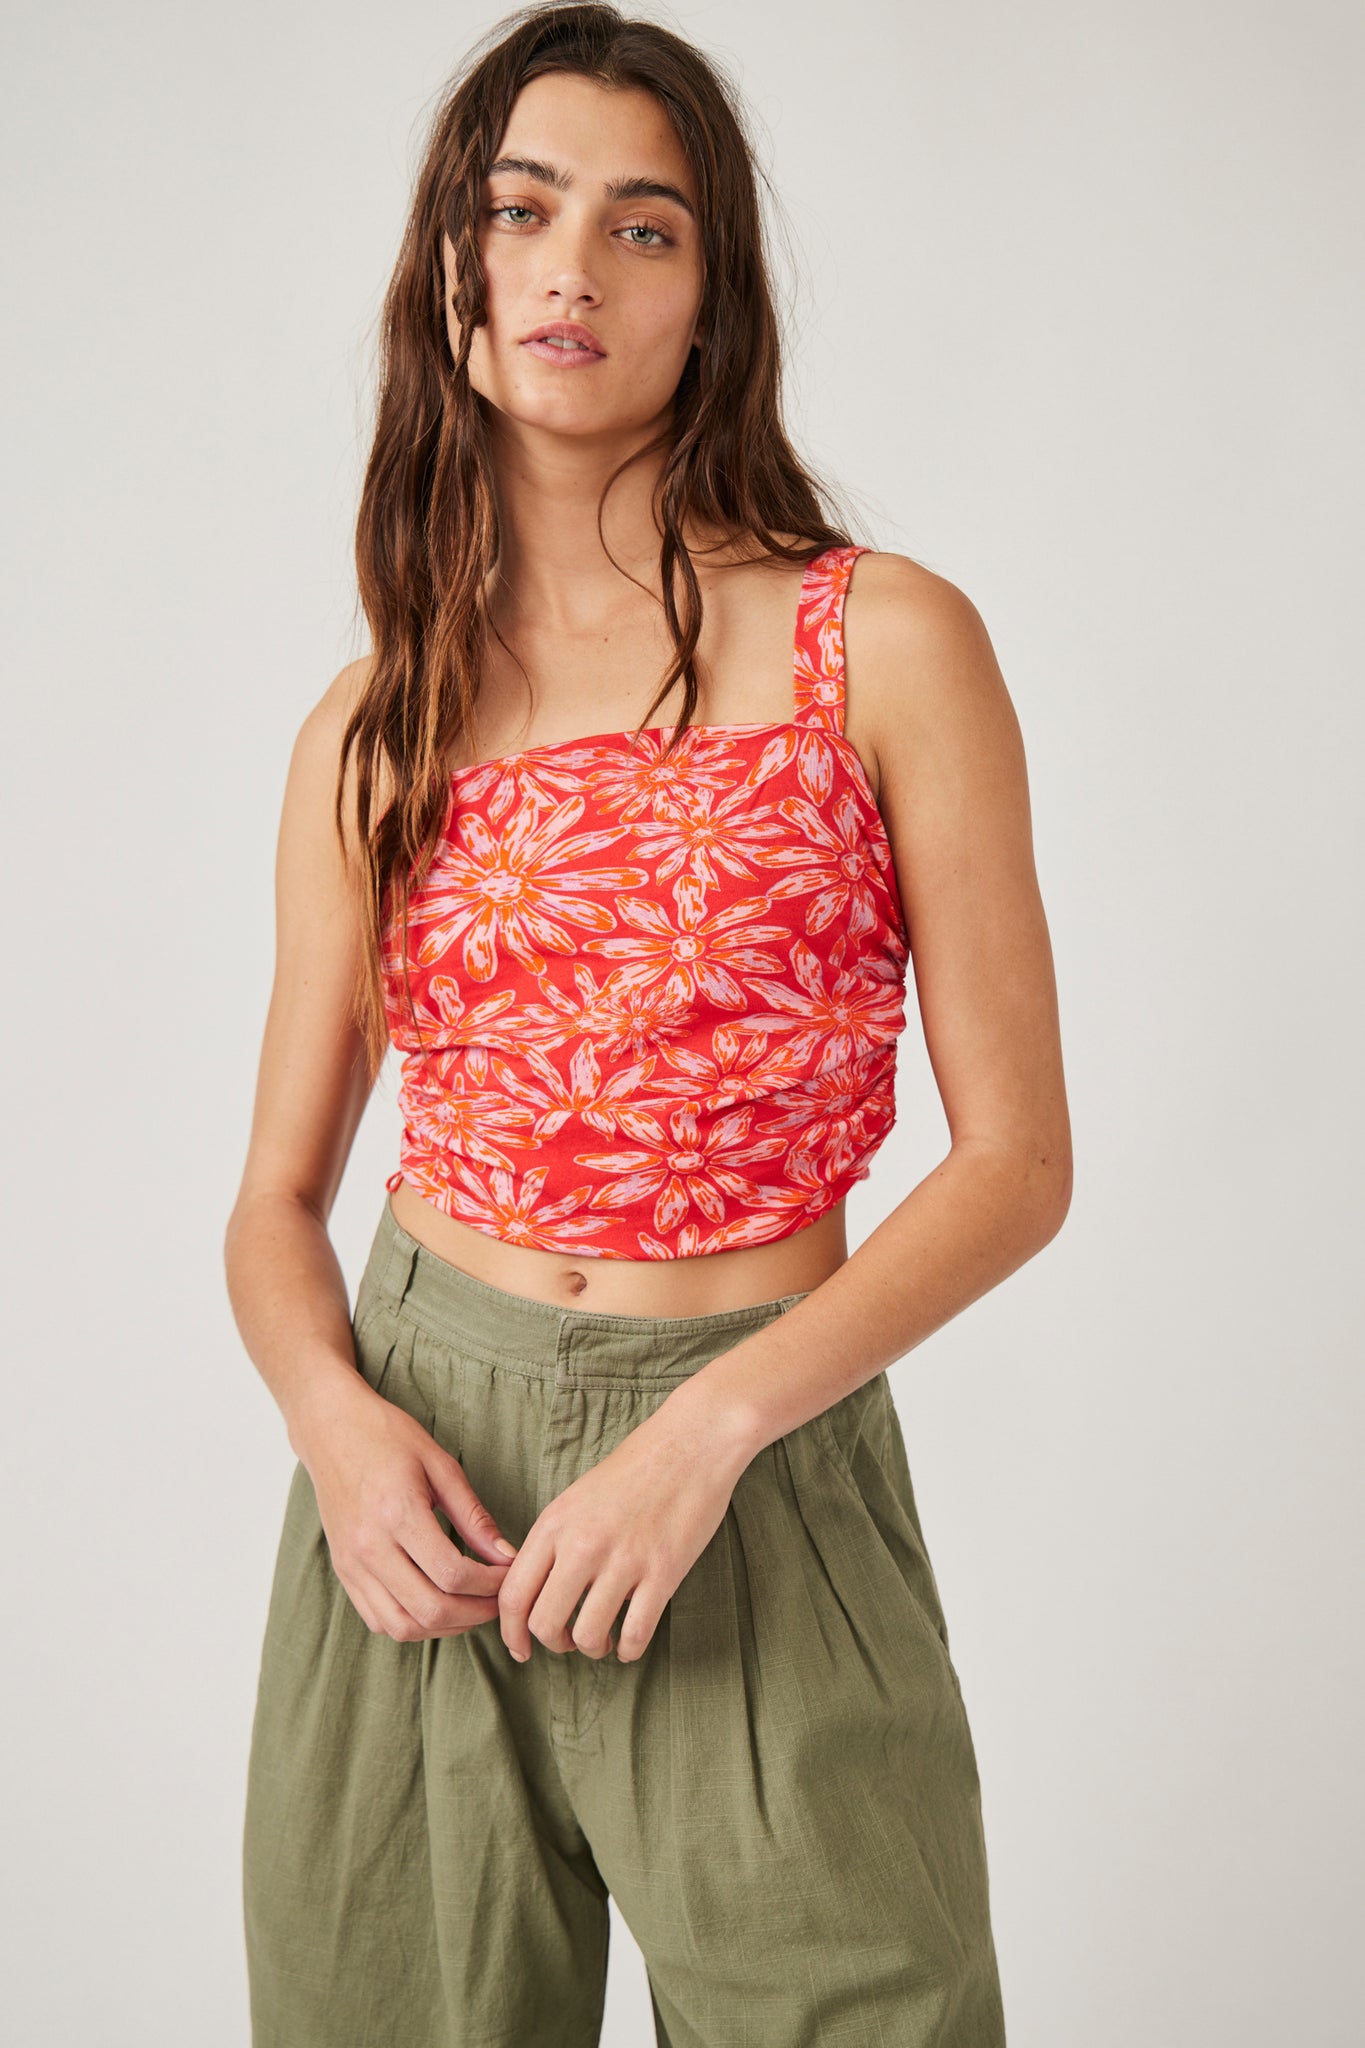 All Tied up Floral Tank - Red & Orange